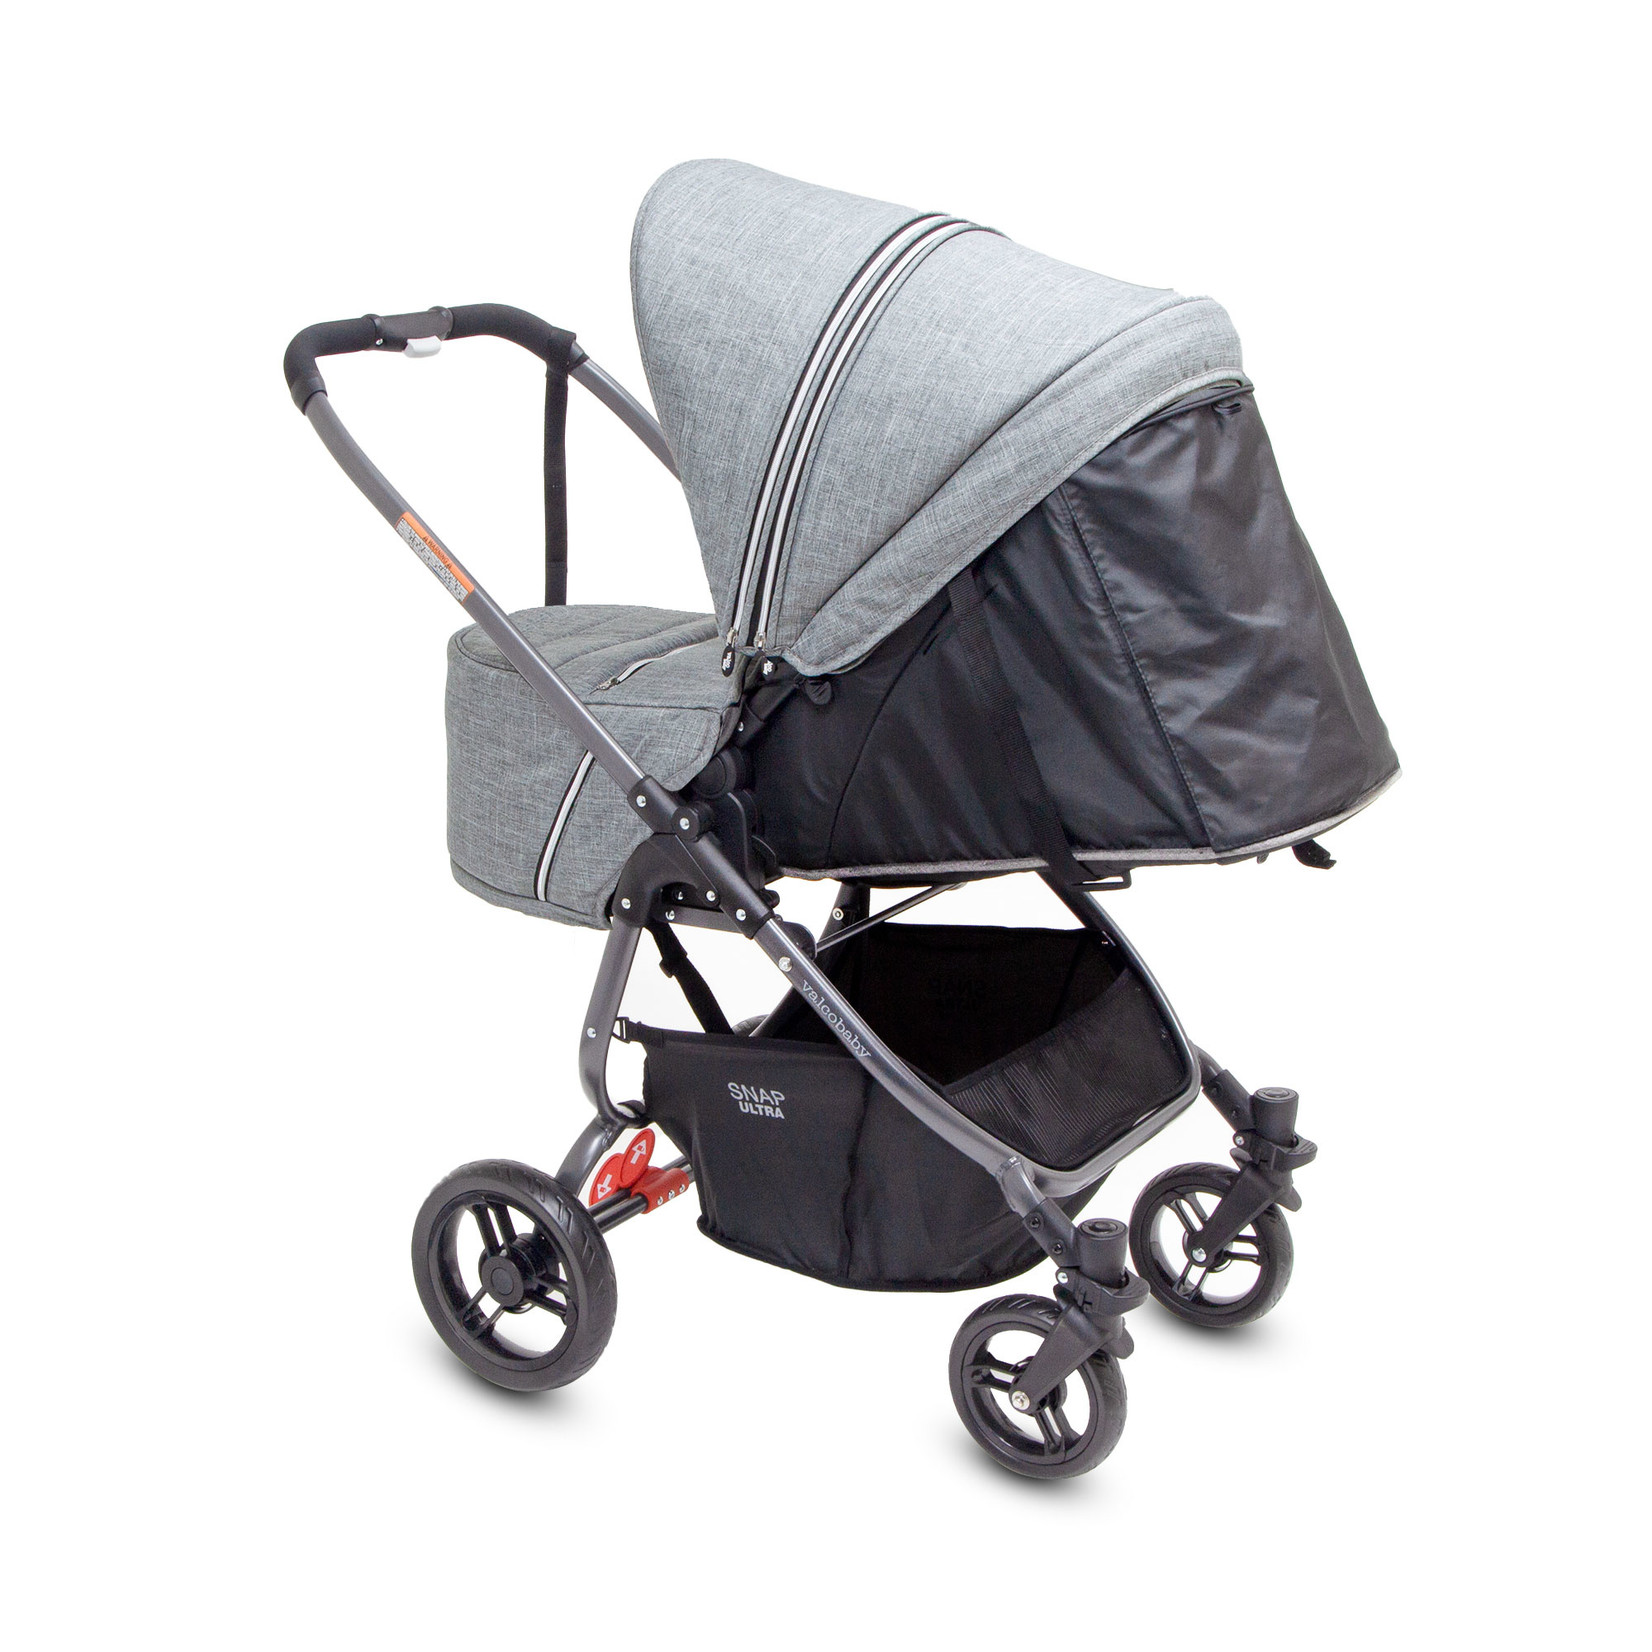 Valco Baby Snap Ultra Tailormade-Grey Marle